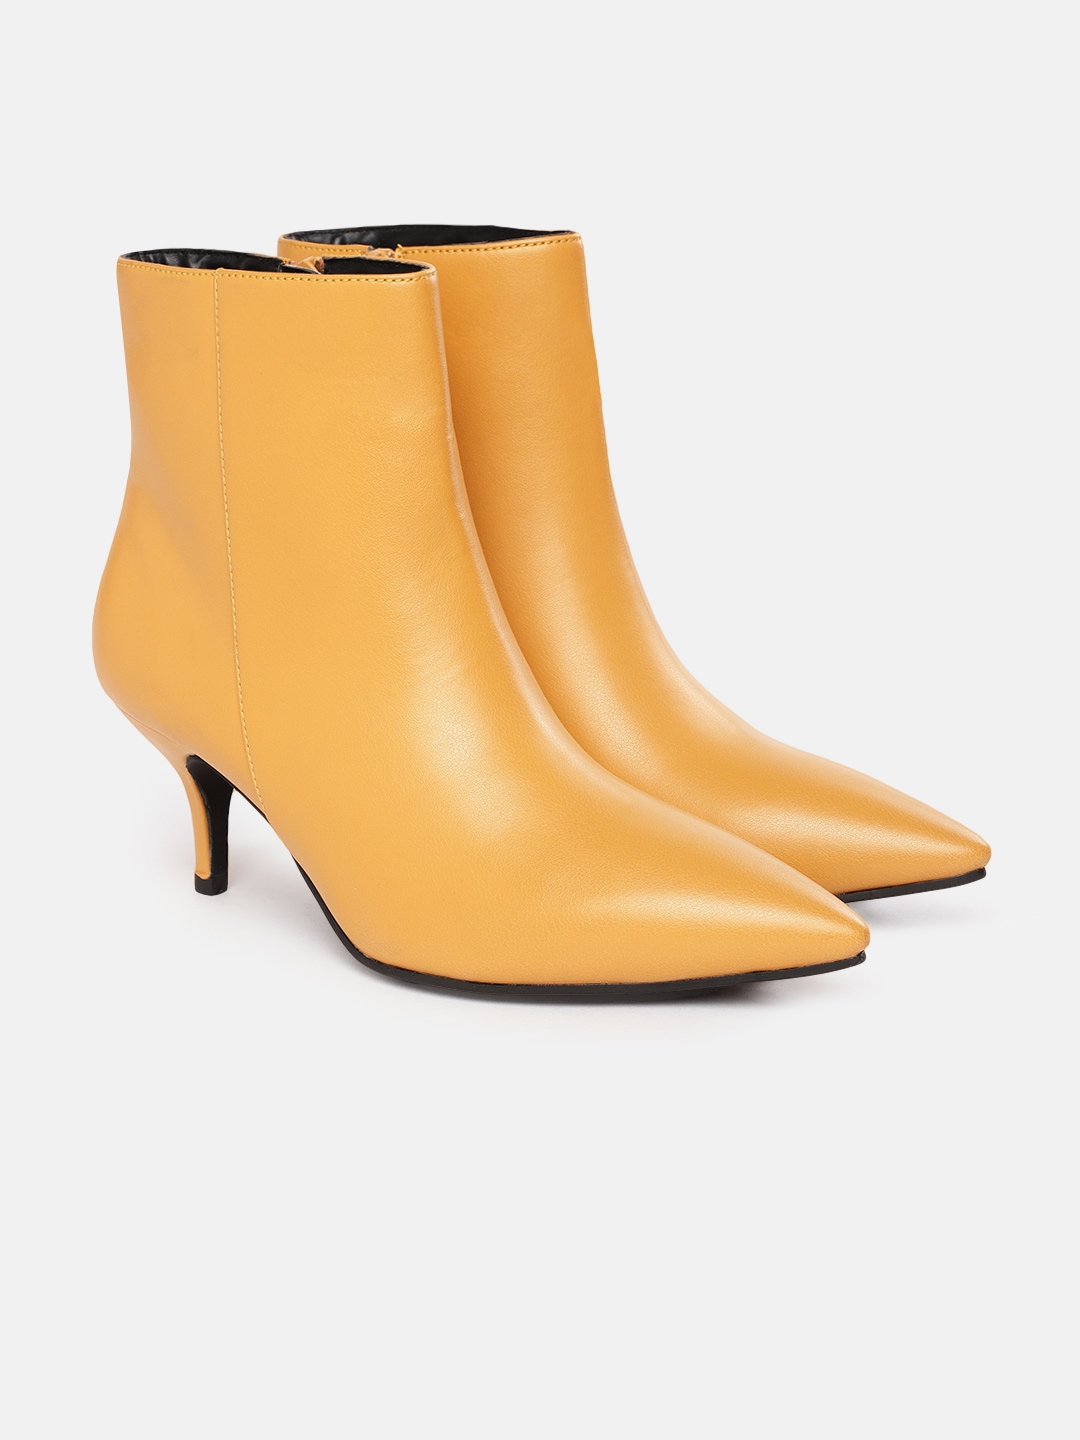 CORSICA Mustard Yellow Solid Heeled Boots Price in India